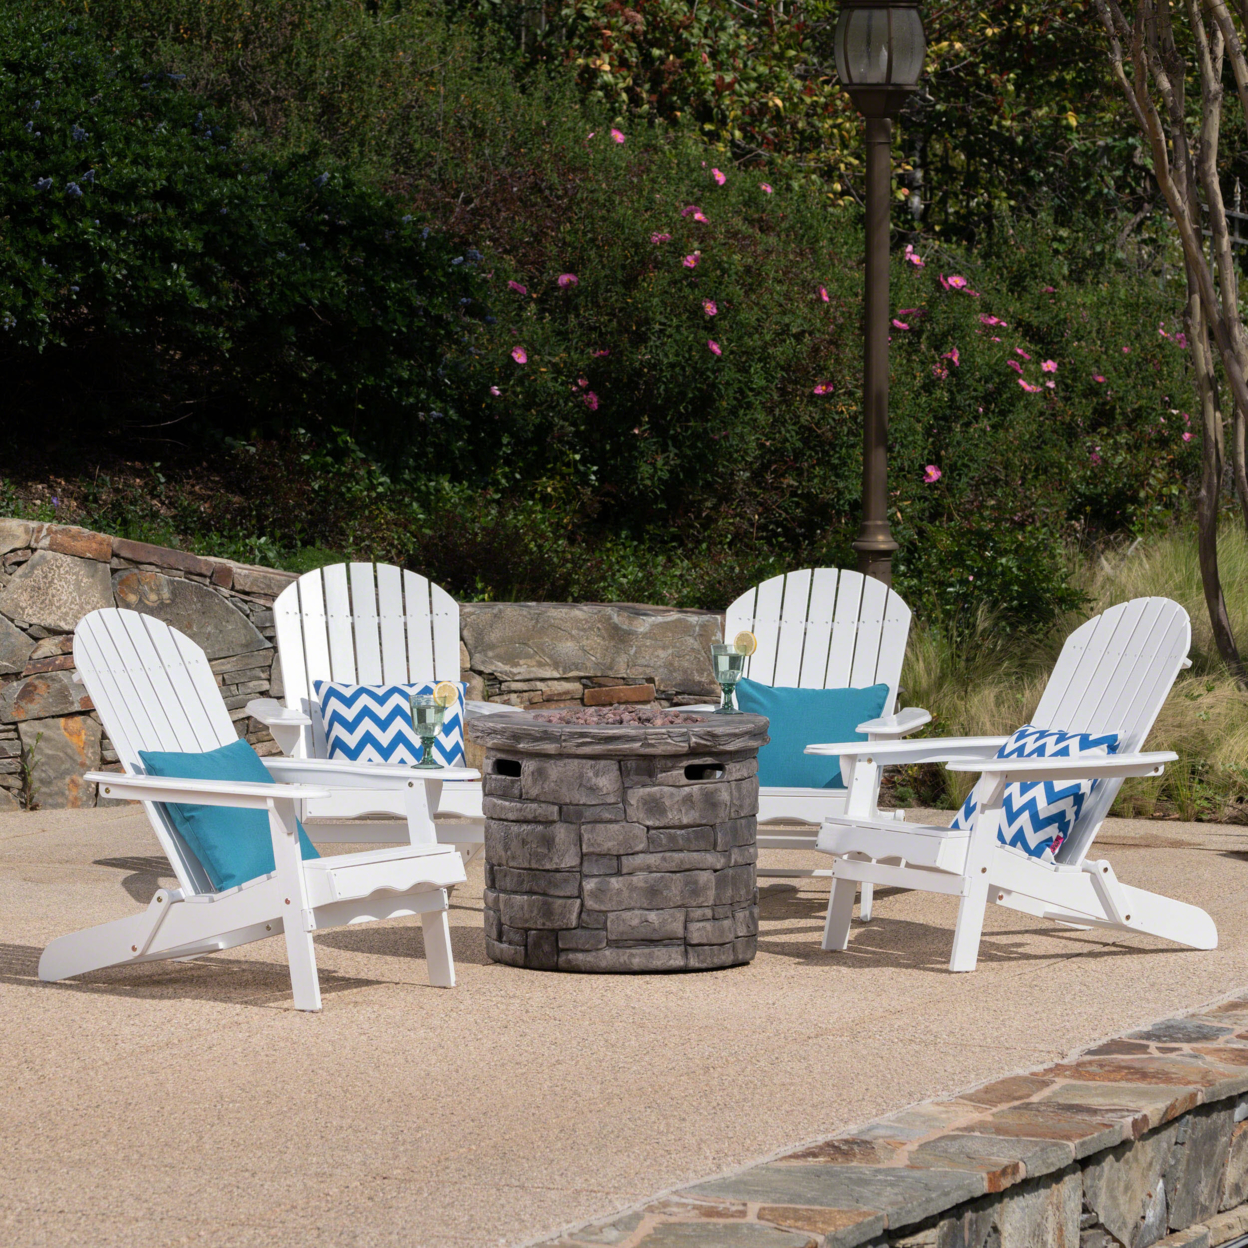 David Outdoor 5 Piece Adirondack Chair Set With Fire Pit - White